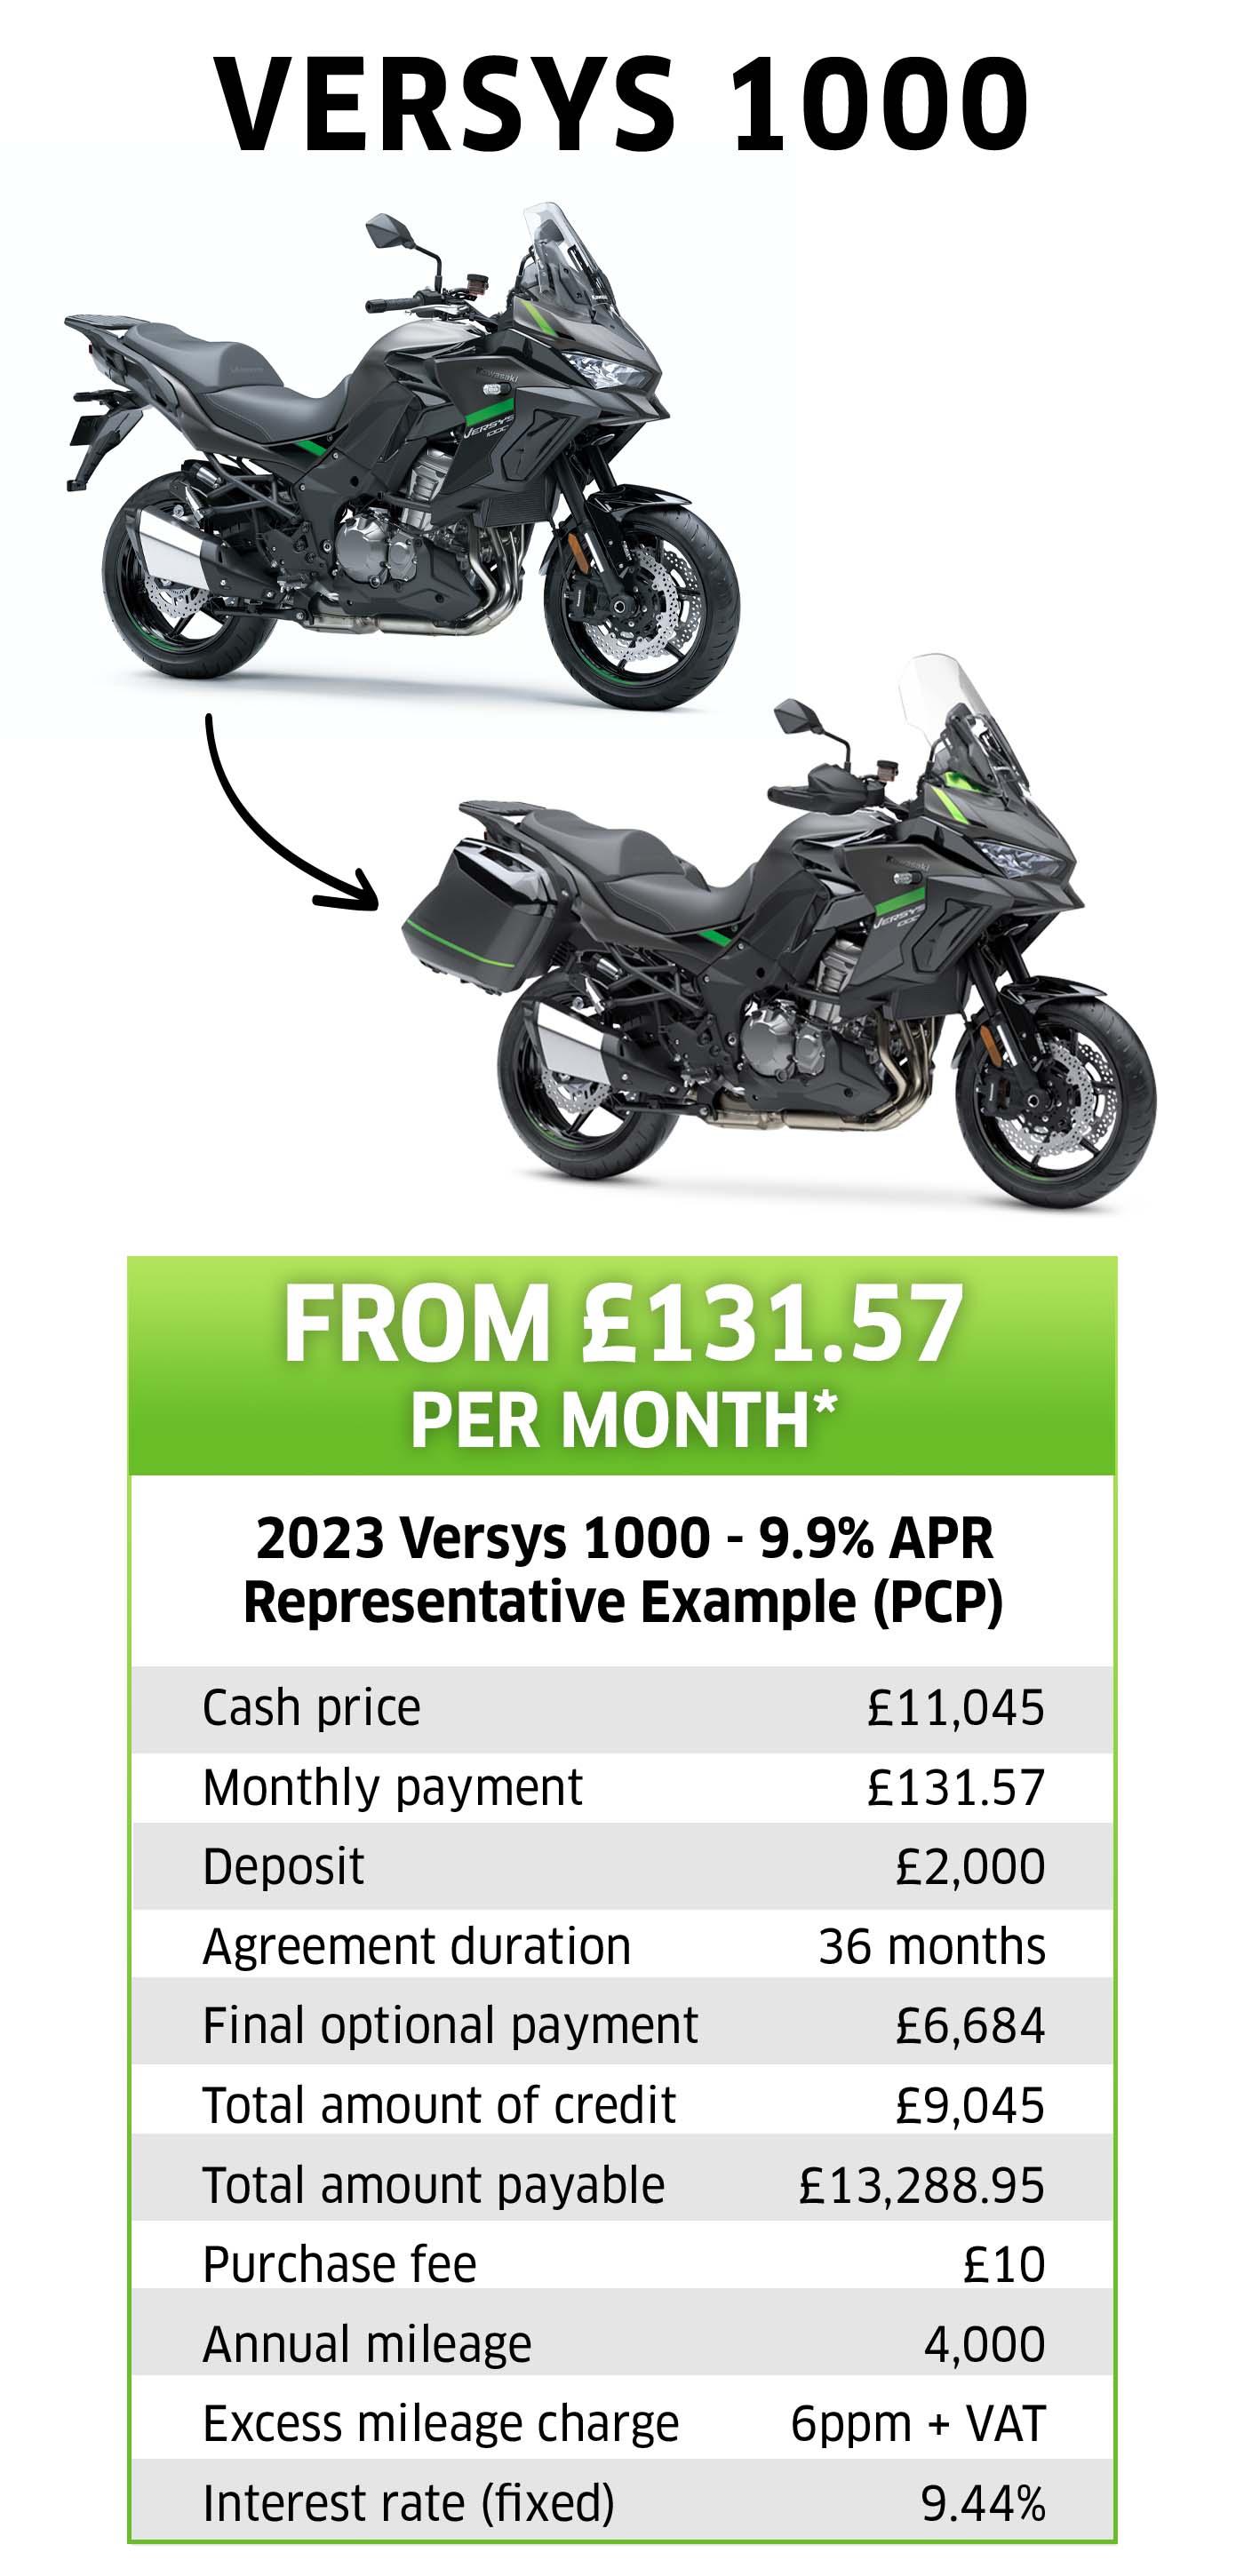 Kawasaki Versys 1000: Enjoy a Free Tourer Upgrade worth £1,150 when you purchase a new 2022 or 2023 model with K-Options 9.9% APR representative finance.